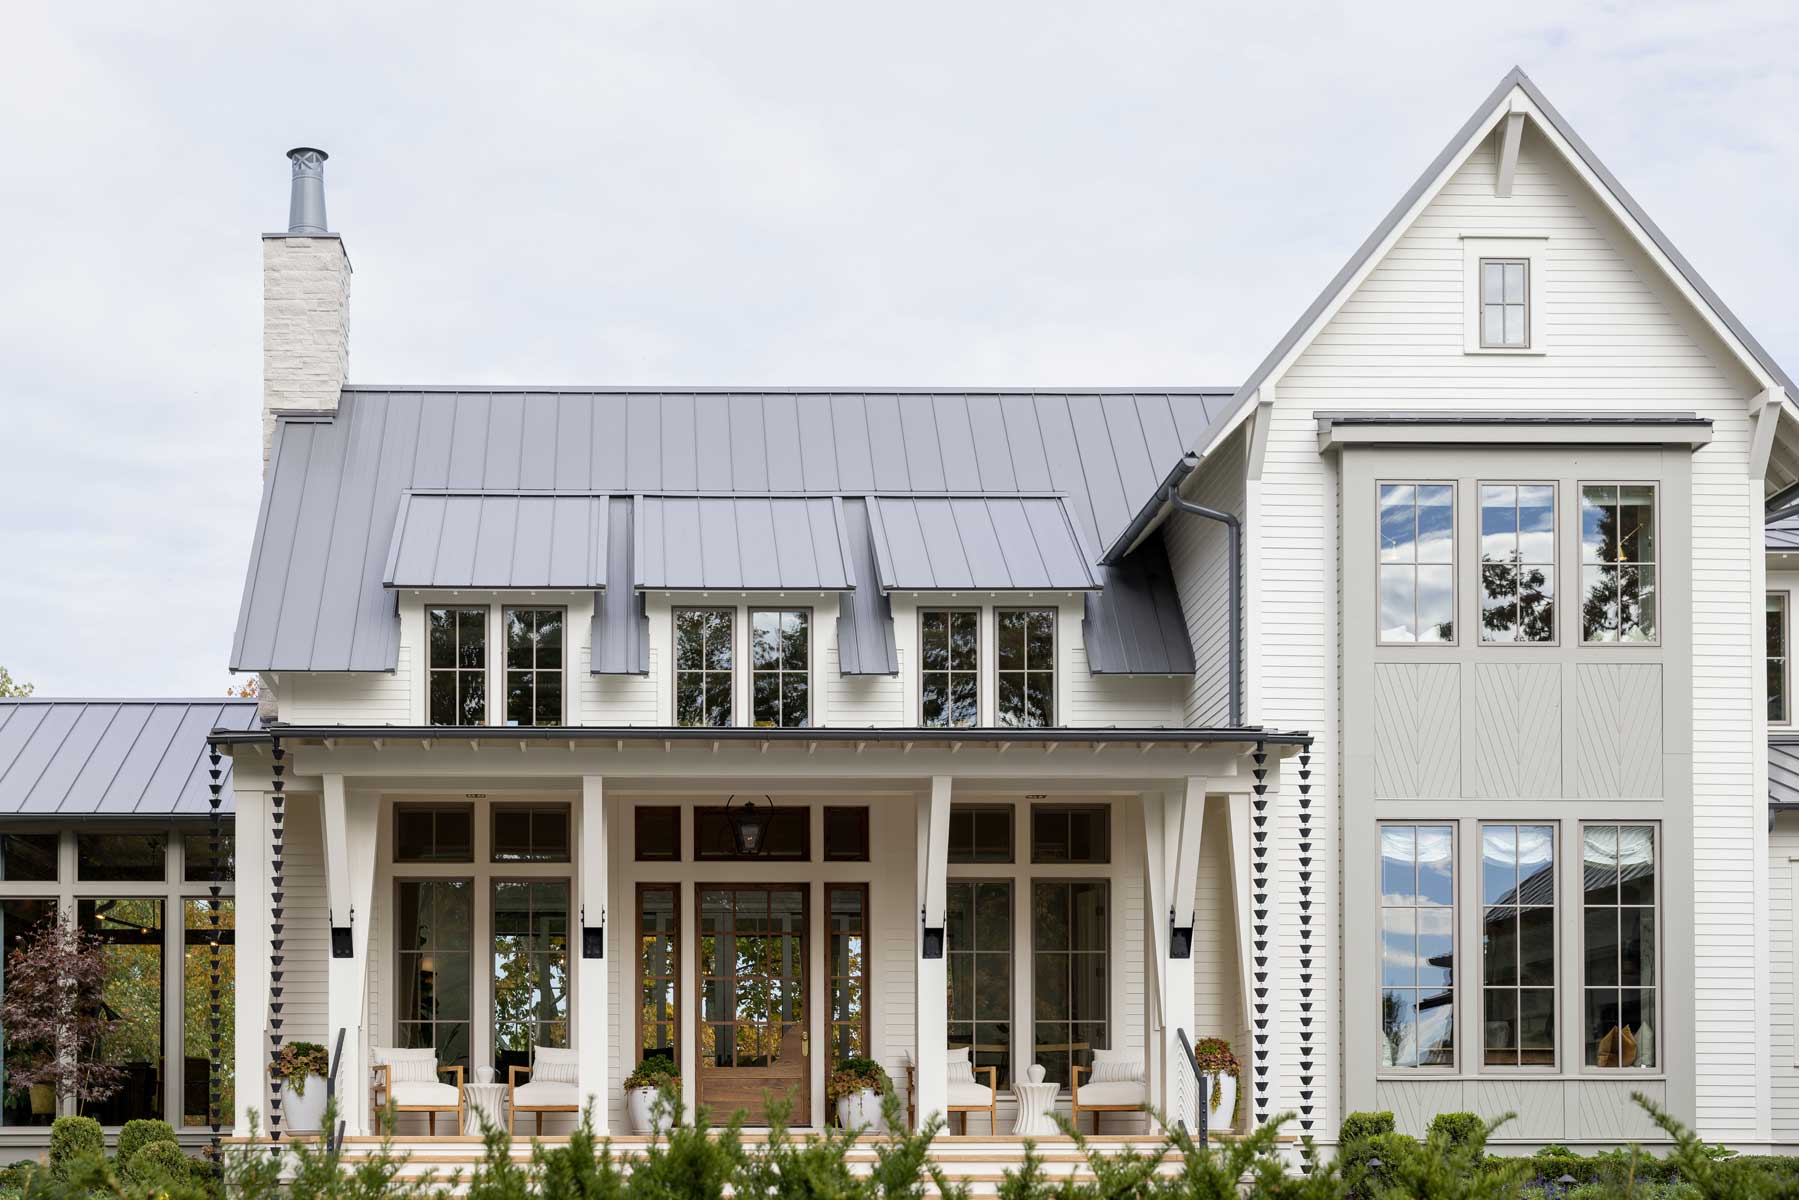 The front porch and exterior of the Southern Living Idea House 2023 in Leiper's Fork, TN, which features Marvin windows and doors.